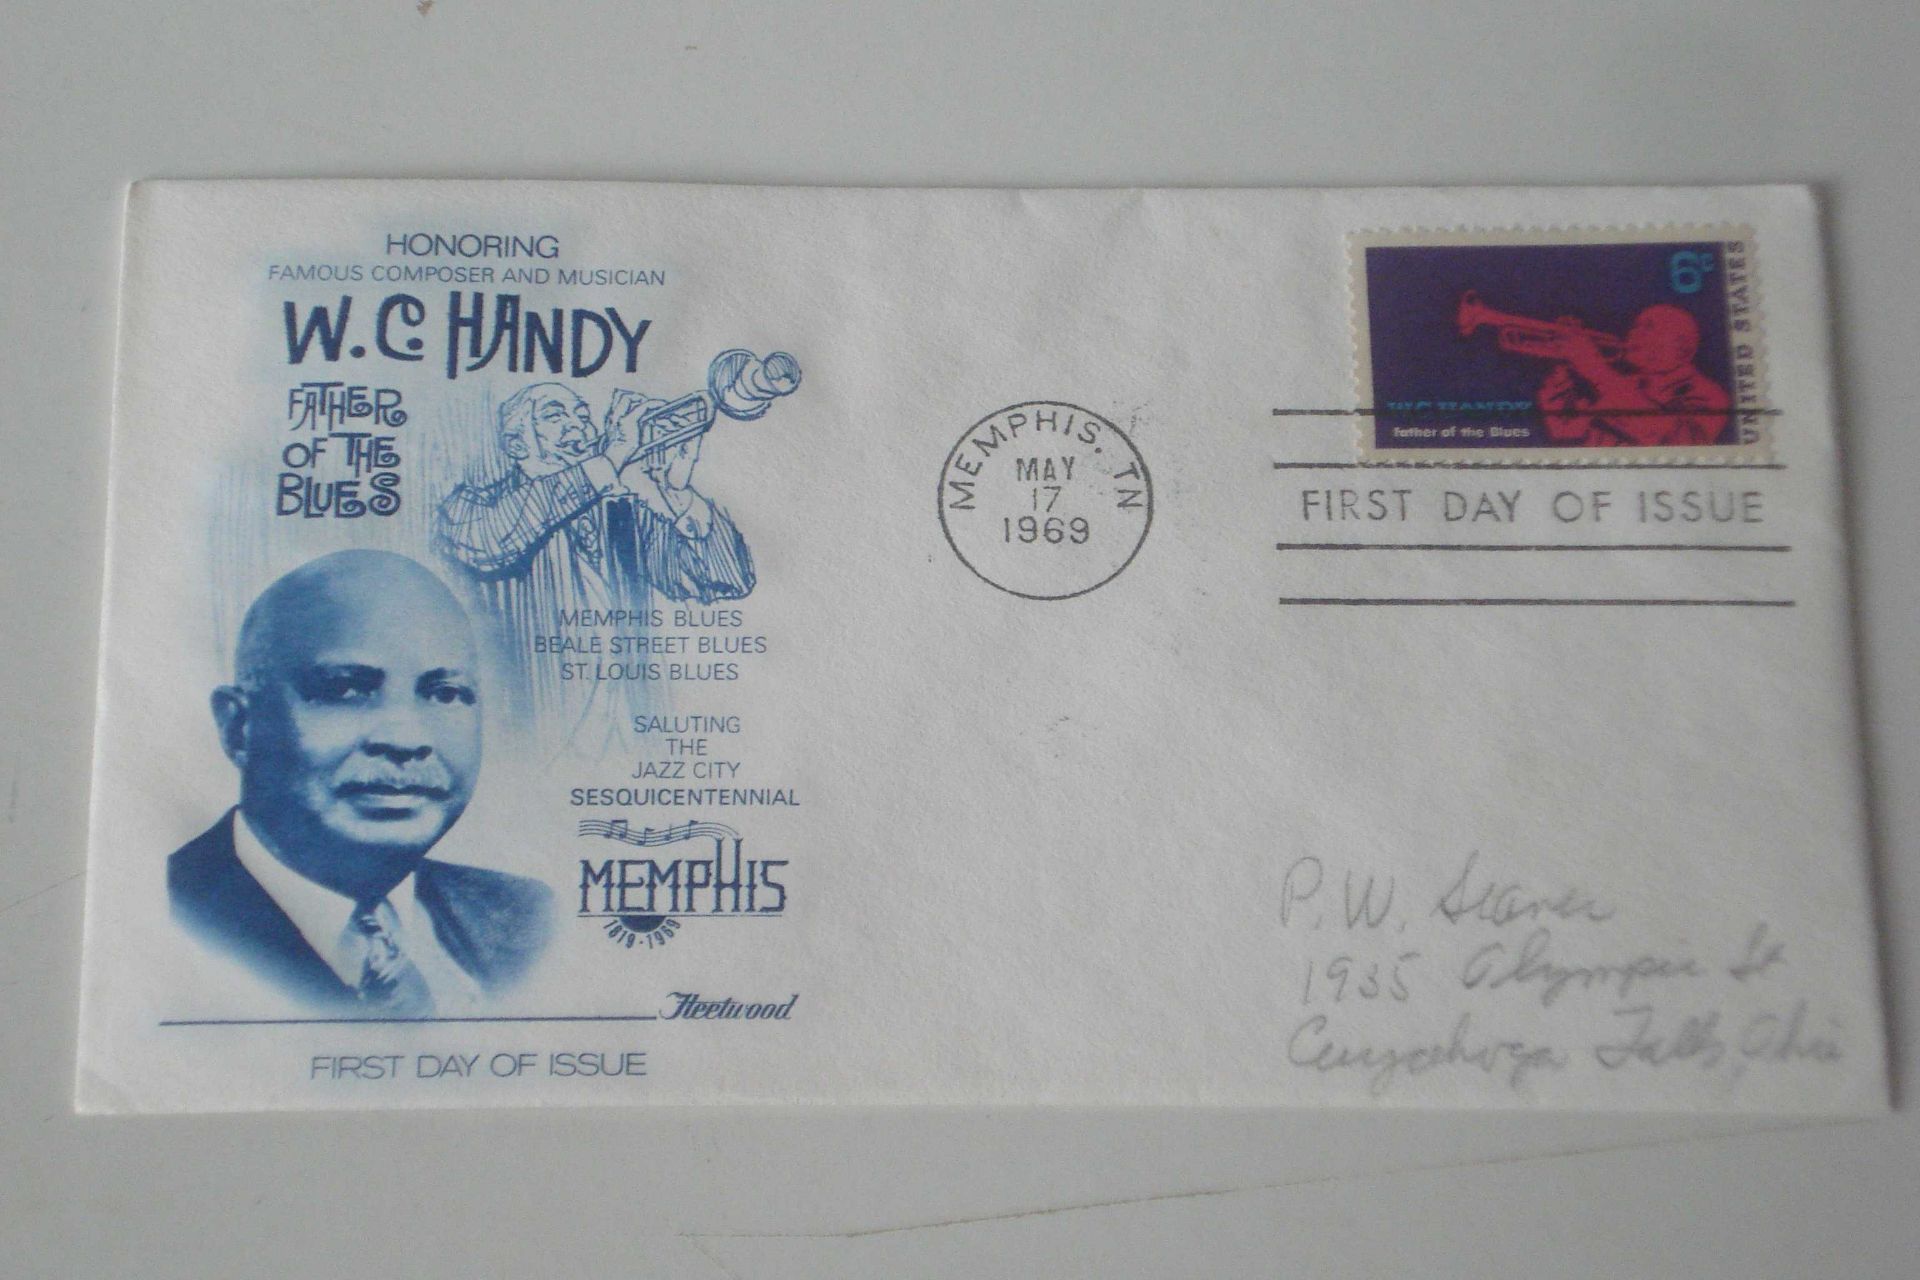 Honoring W C Handy 1969 USA first day of issue commemorative stamp cover